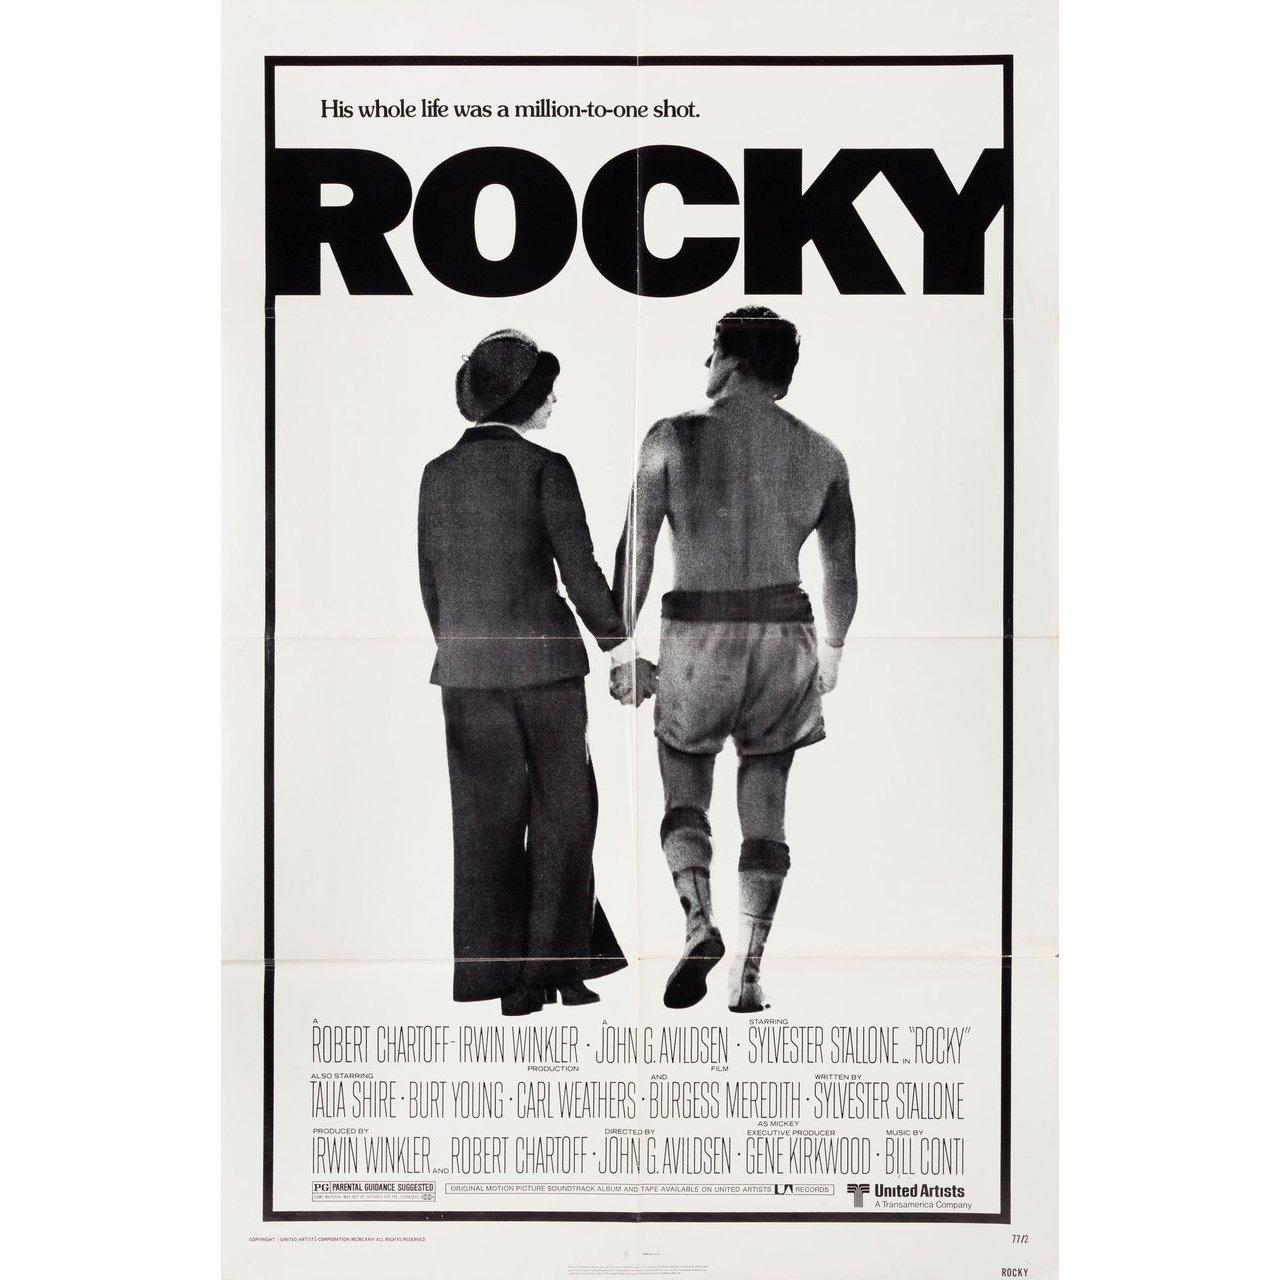 Original 1976 U.S. one sheet poster for the film Rocky directed by John G. Avildsen with Sylvester Stallone / Talia Shire / Burt Young / Carl Weathers. Very Good condition, folded with pinholes. Many original posters were issued folded or were